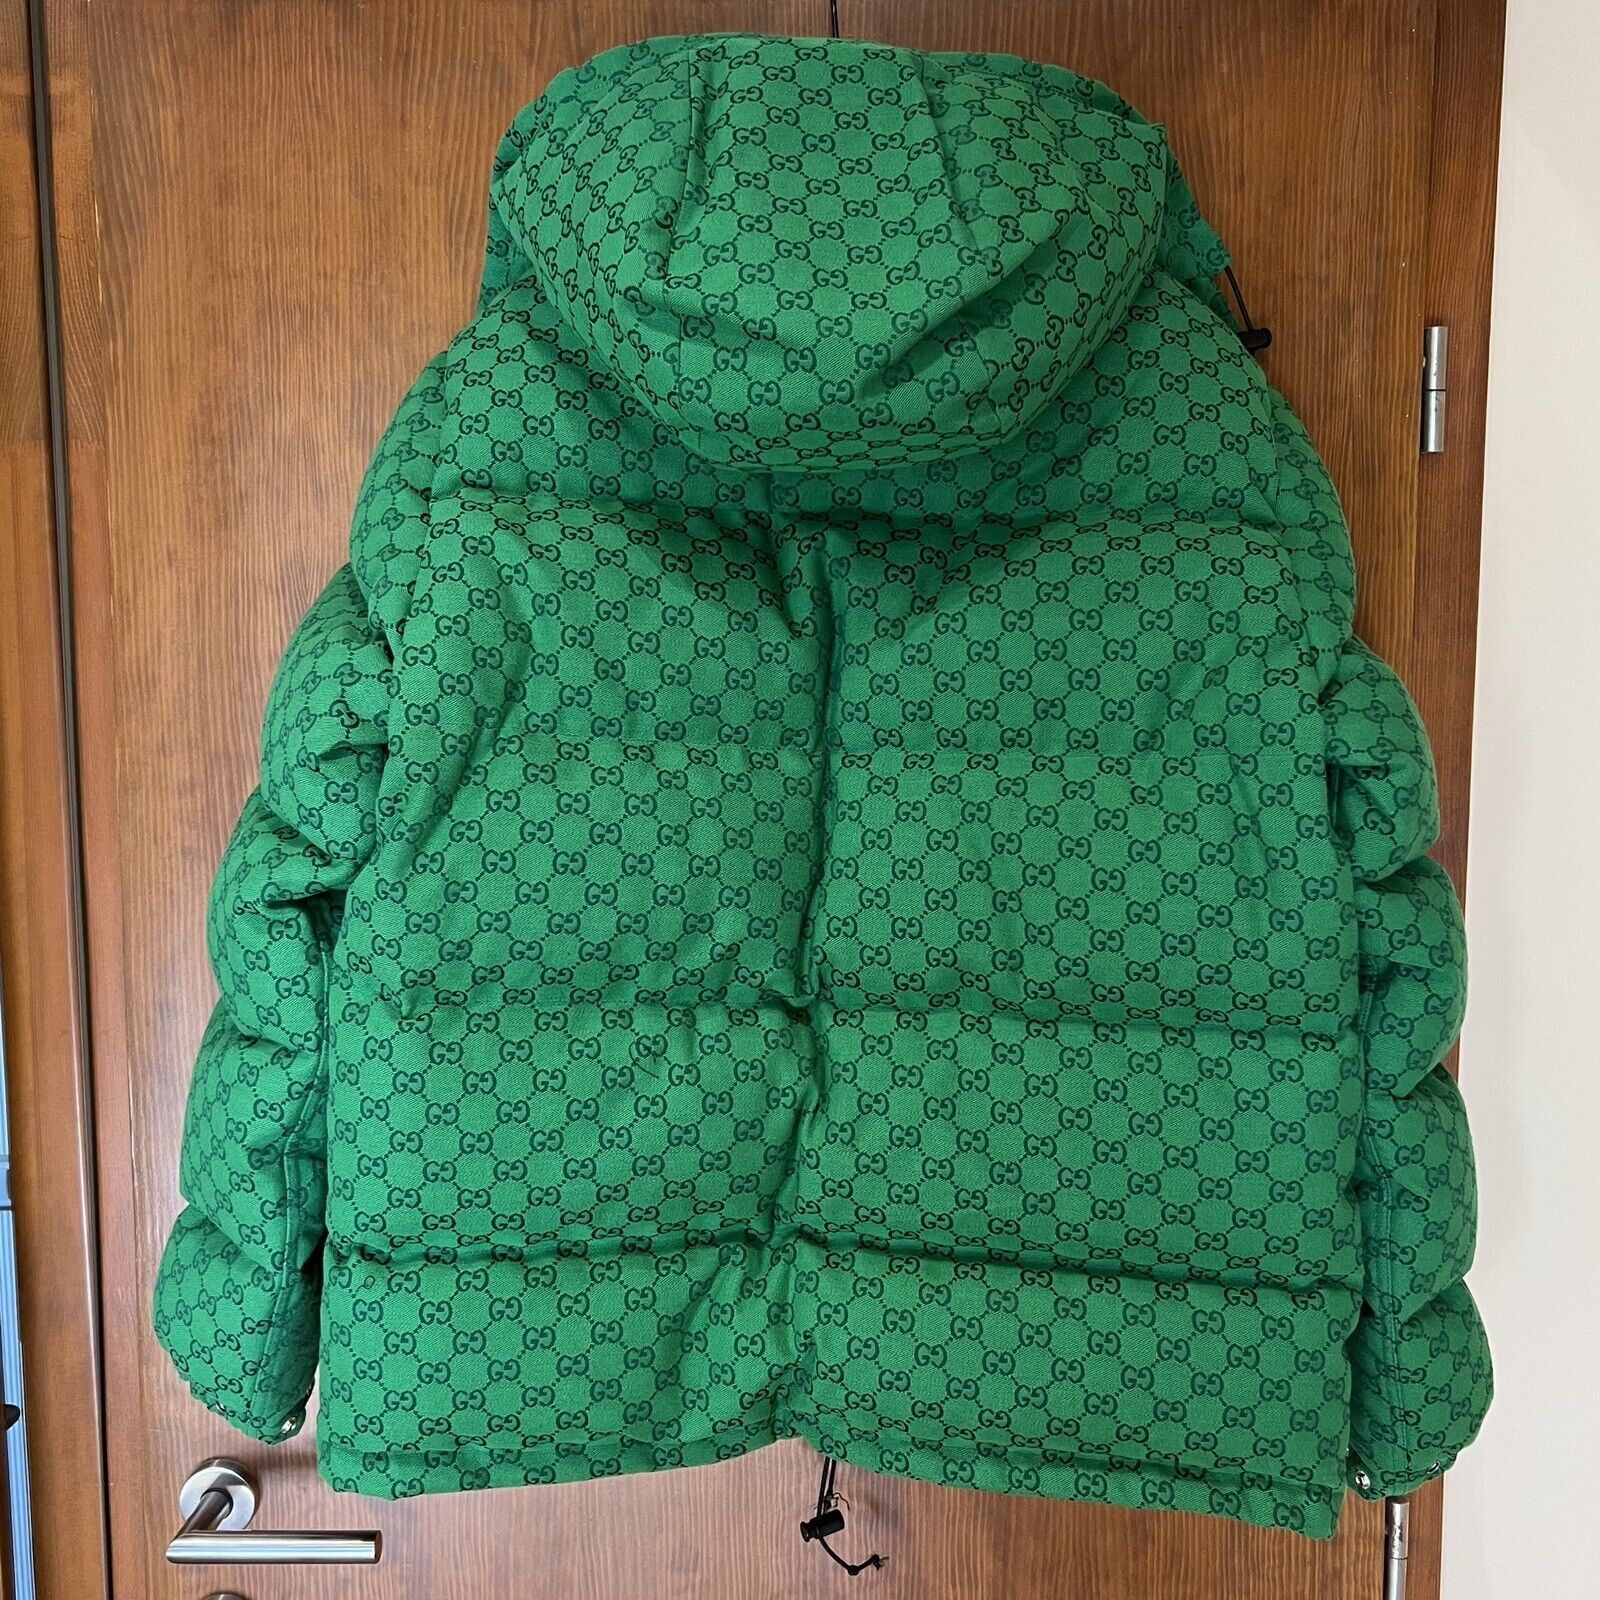 Gucci X North Face Gucci Puffer Jacket In All Sizes